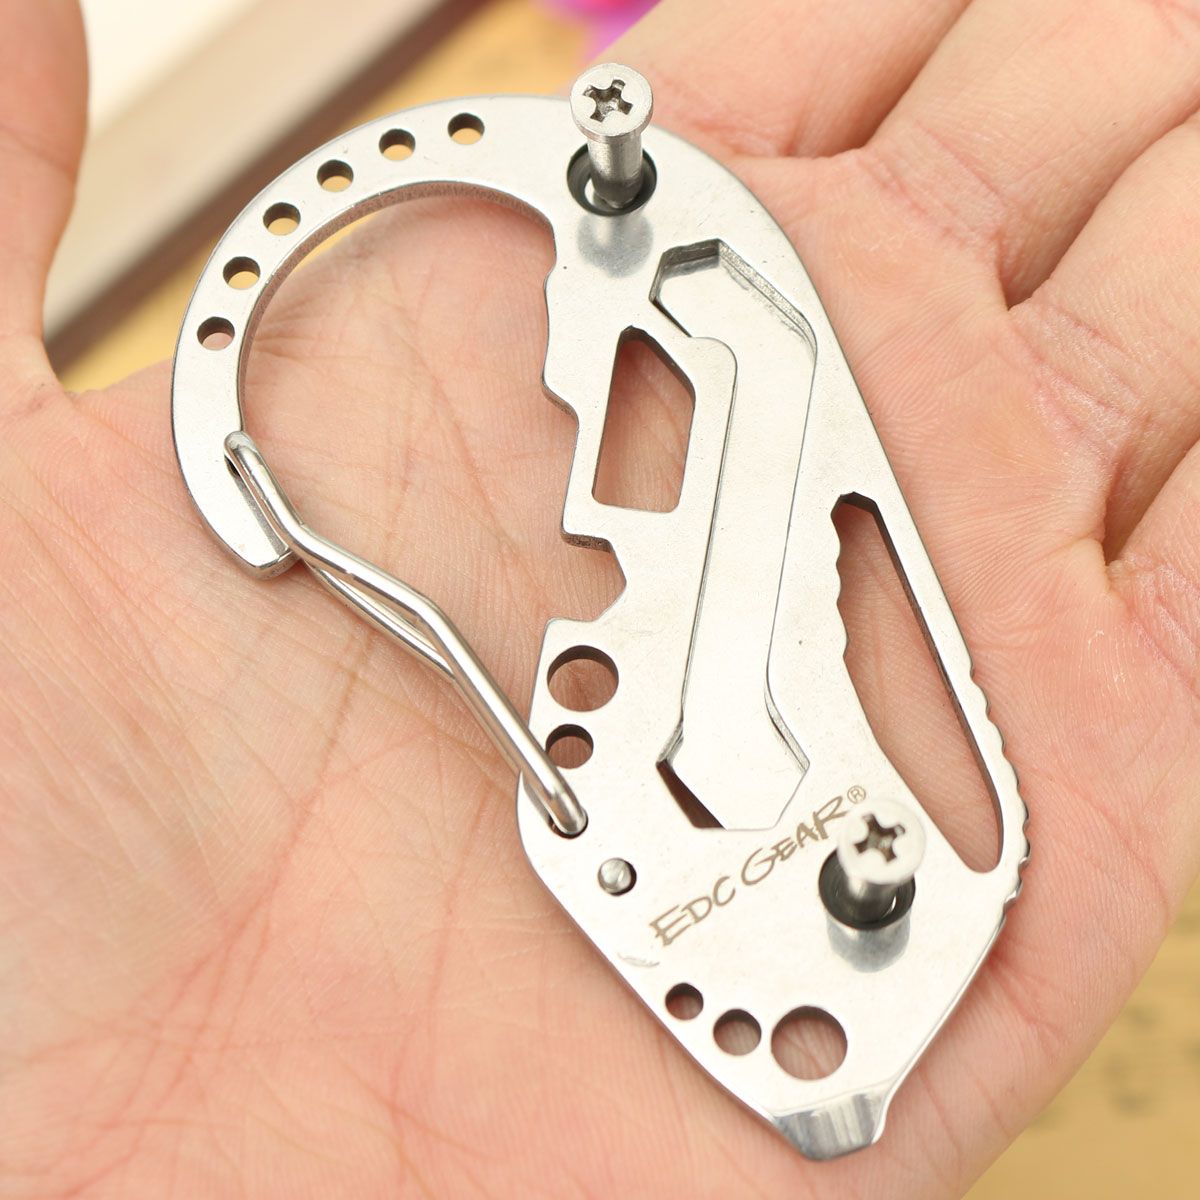 Multifunction-Stainless-Steel-Portable-Key-Chain-Holder-Carabiner-Wrench-EDC-Outdoor-Tool-1022461